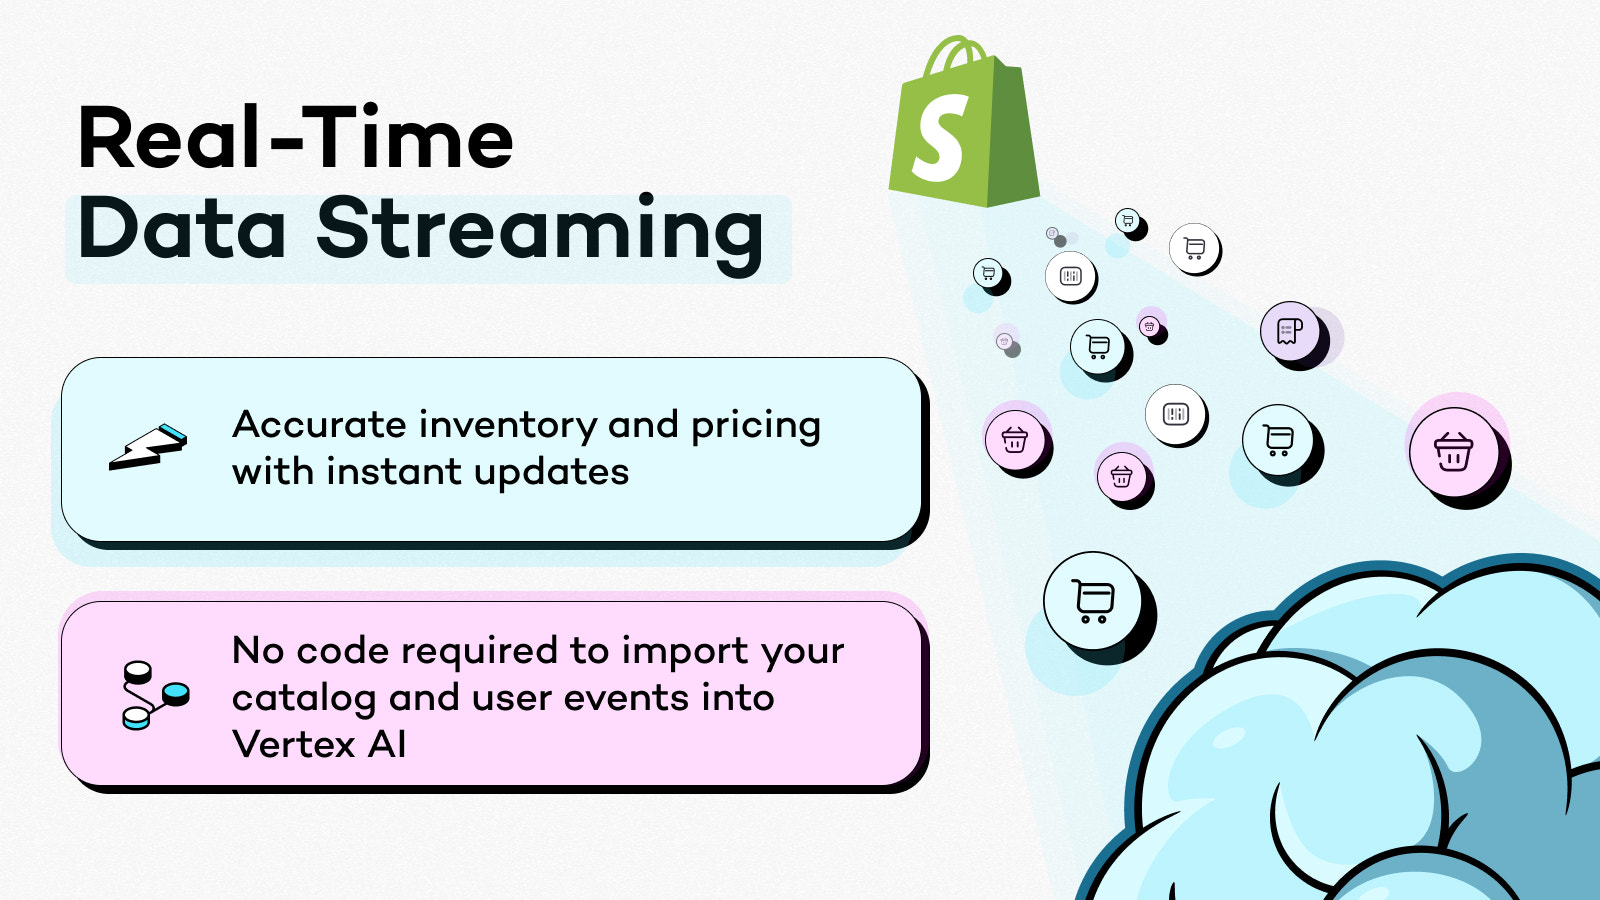 Real-Time Data Streaming